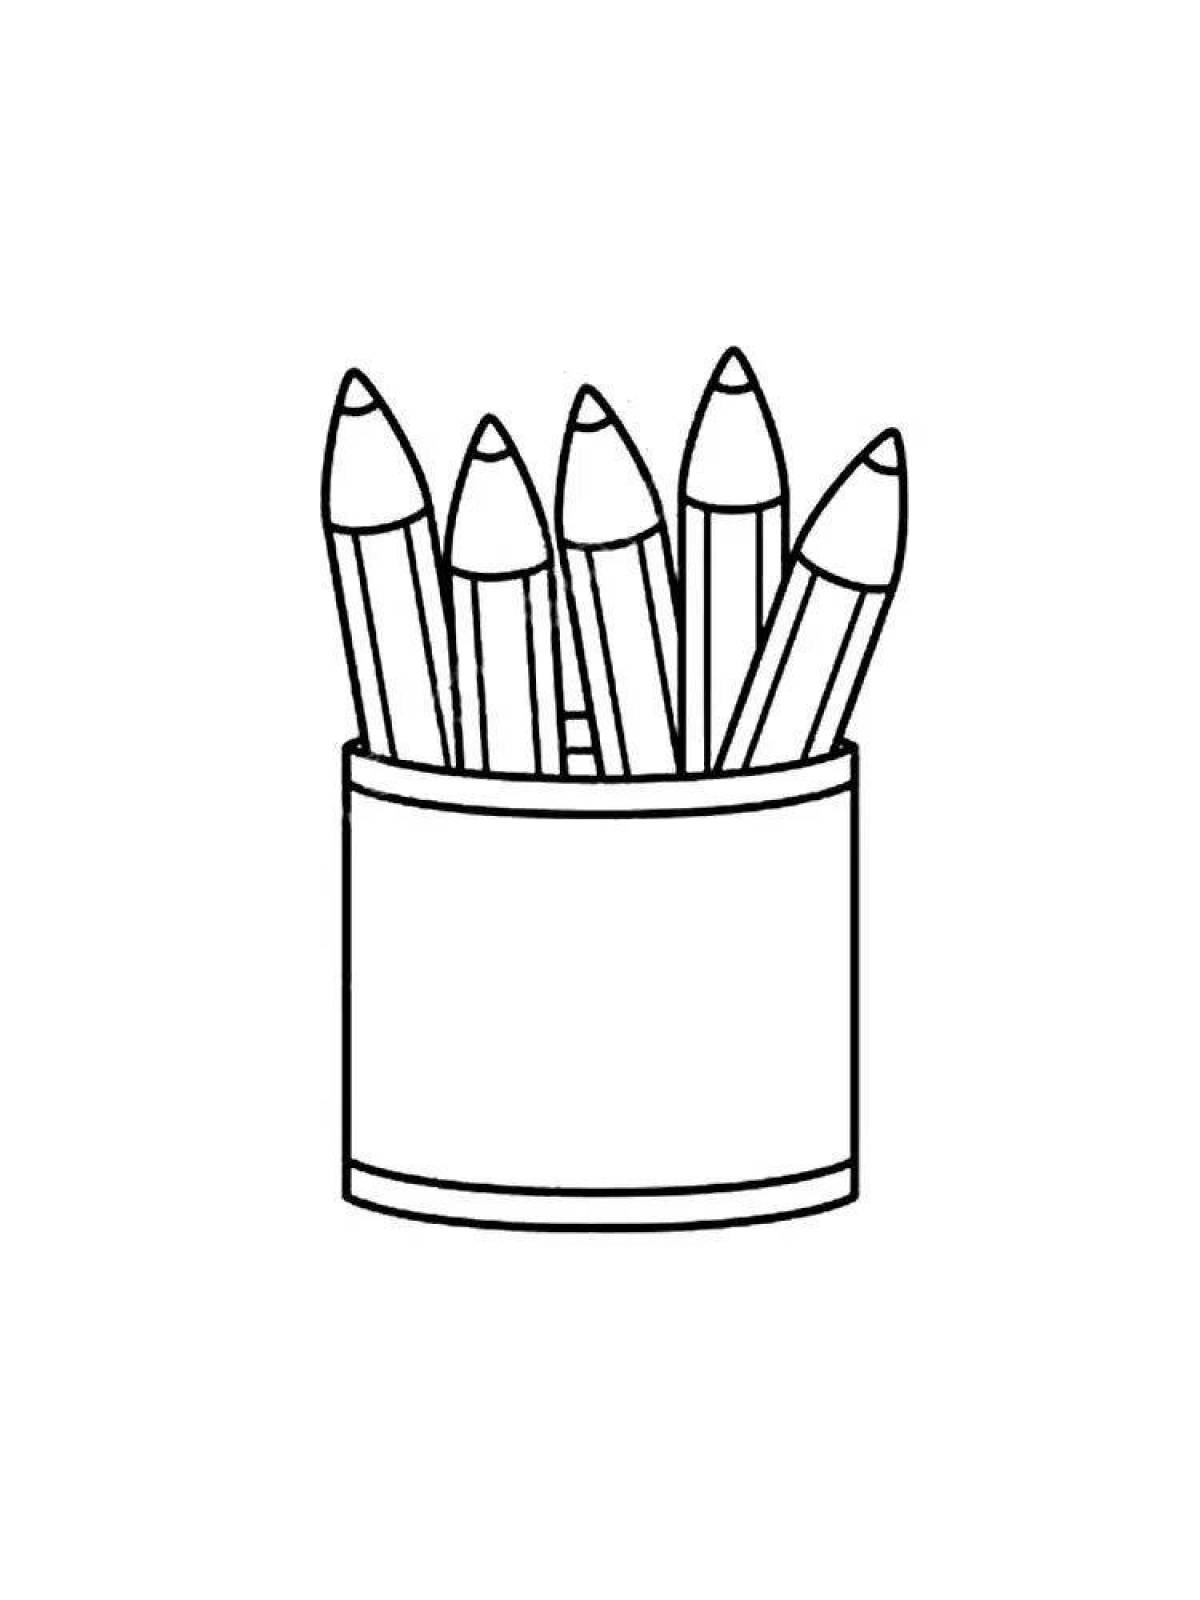 Color-frenzy roux pencils coloring page